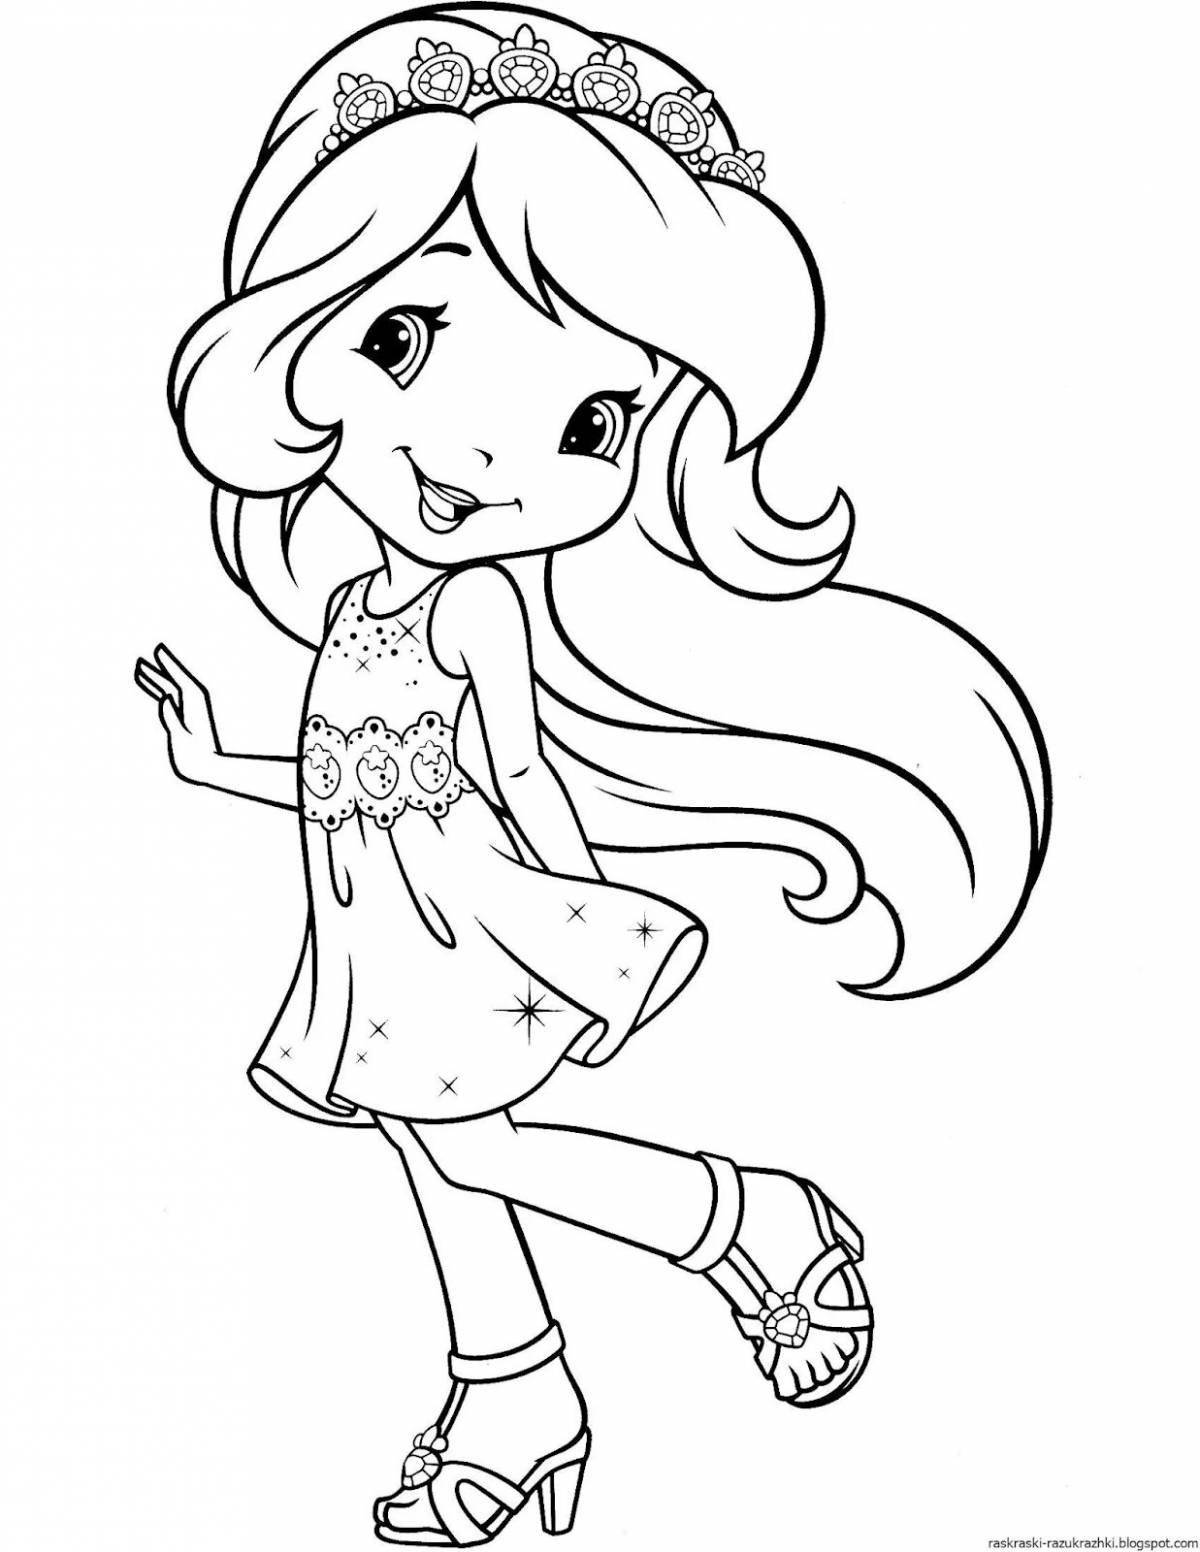 Fun coloring page for girls